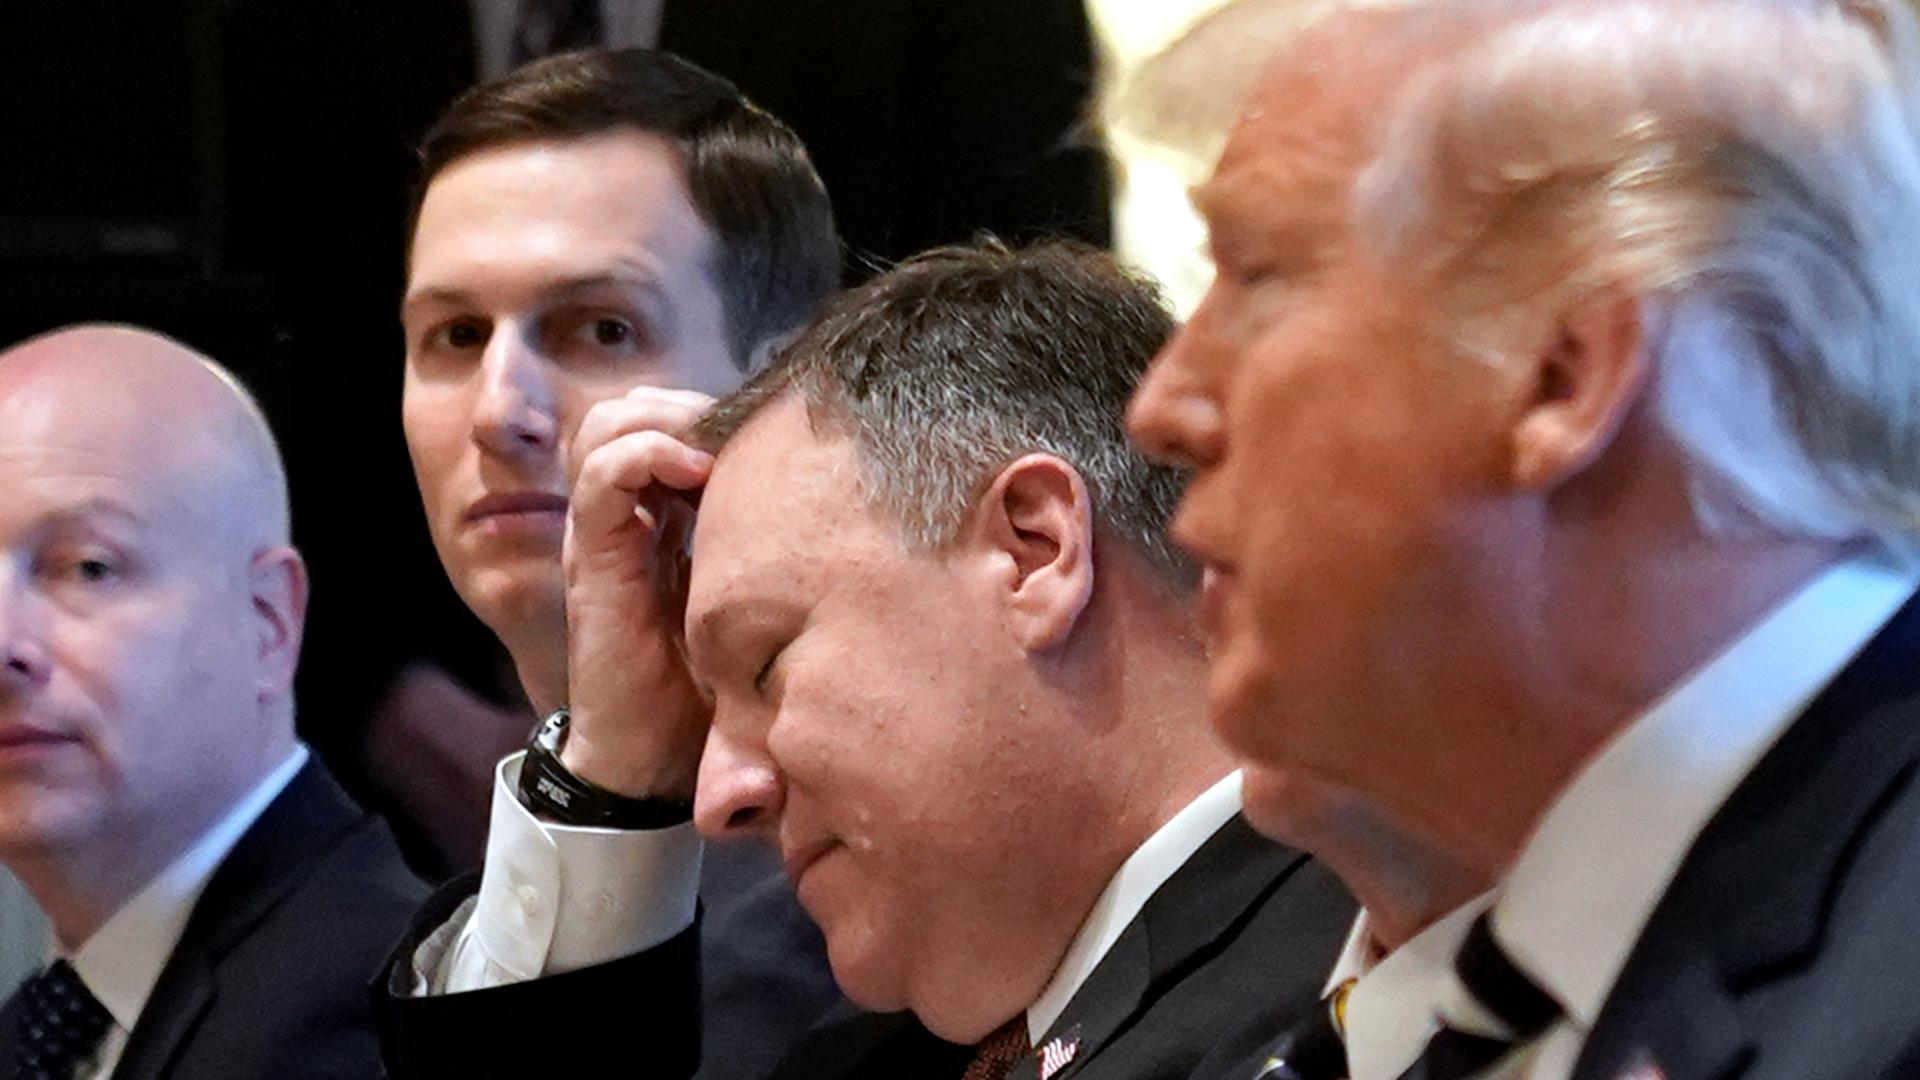 CIA Director Mike Pompeo sits center in the in-between President Donald Trump in the near ground and Jared Kushner in the background.